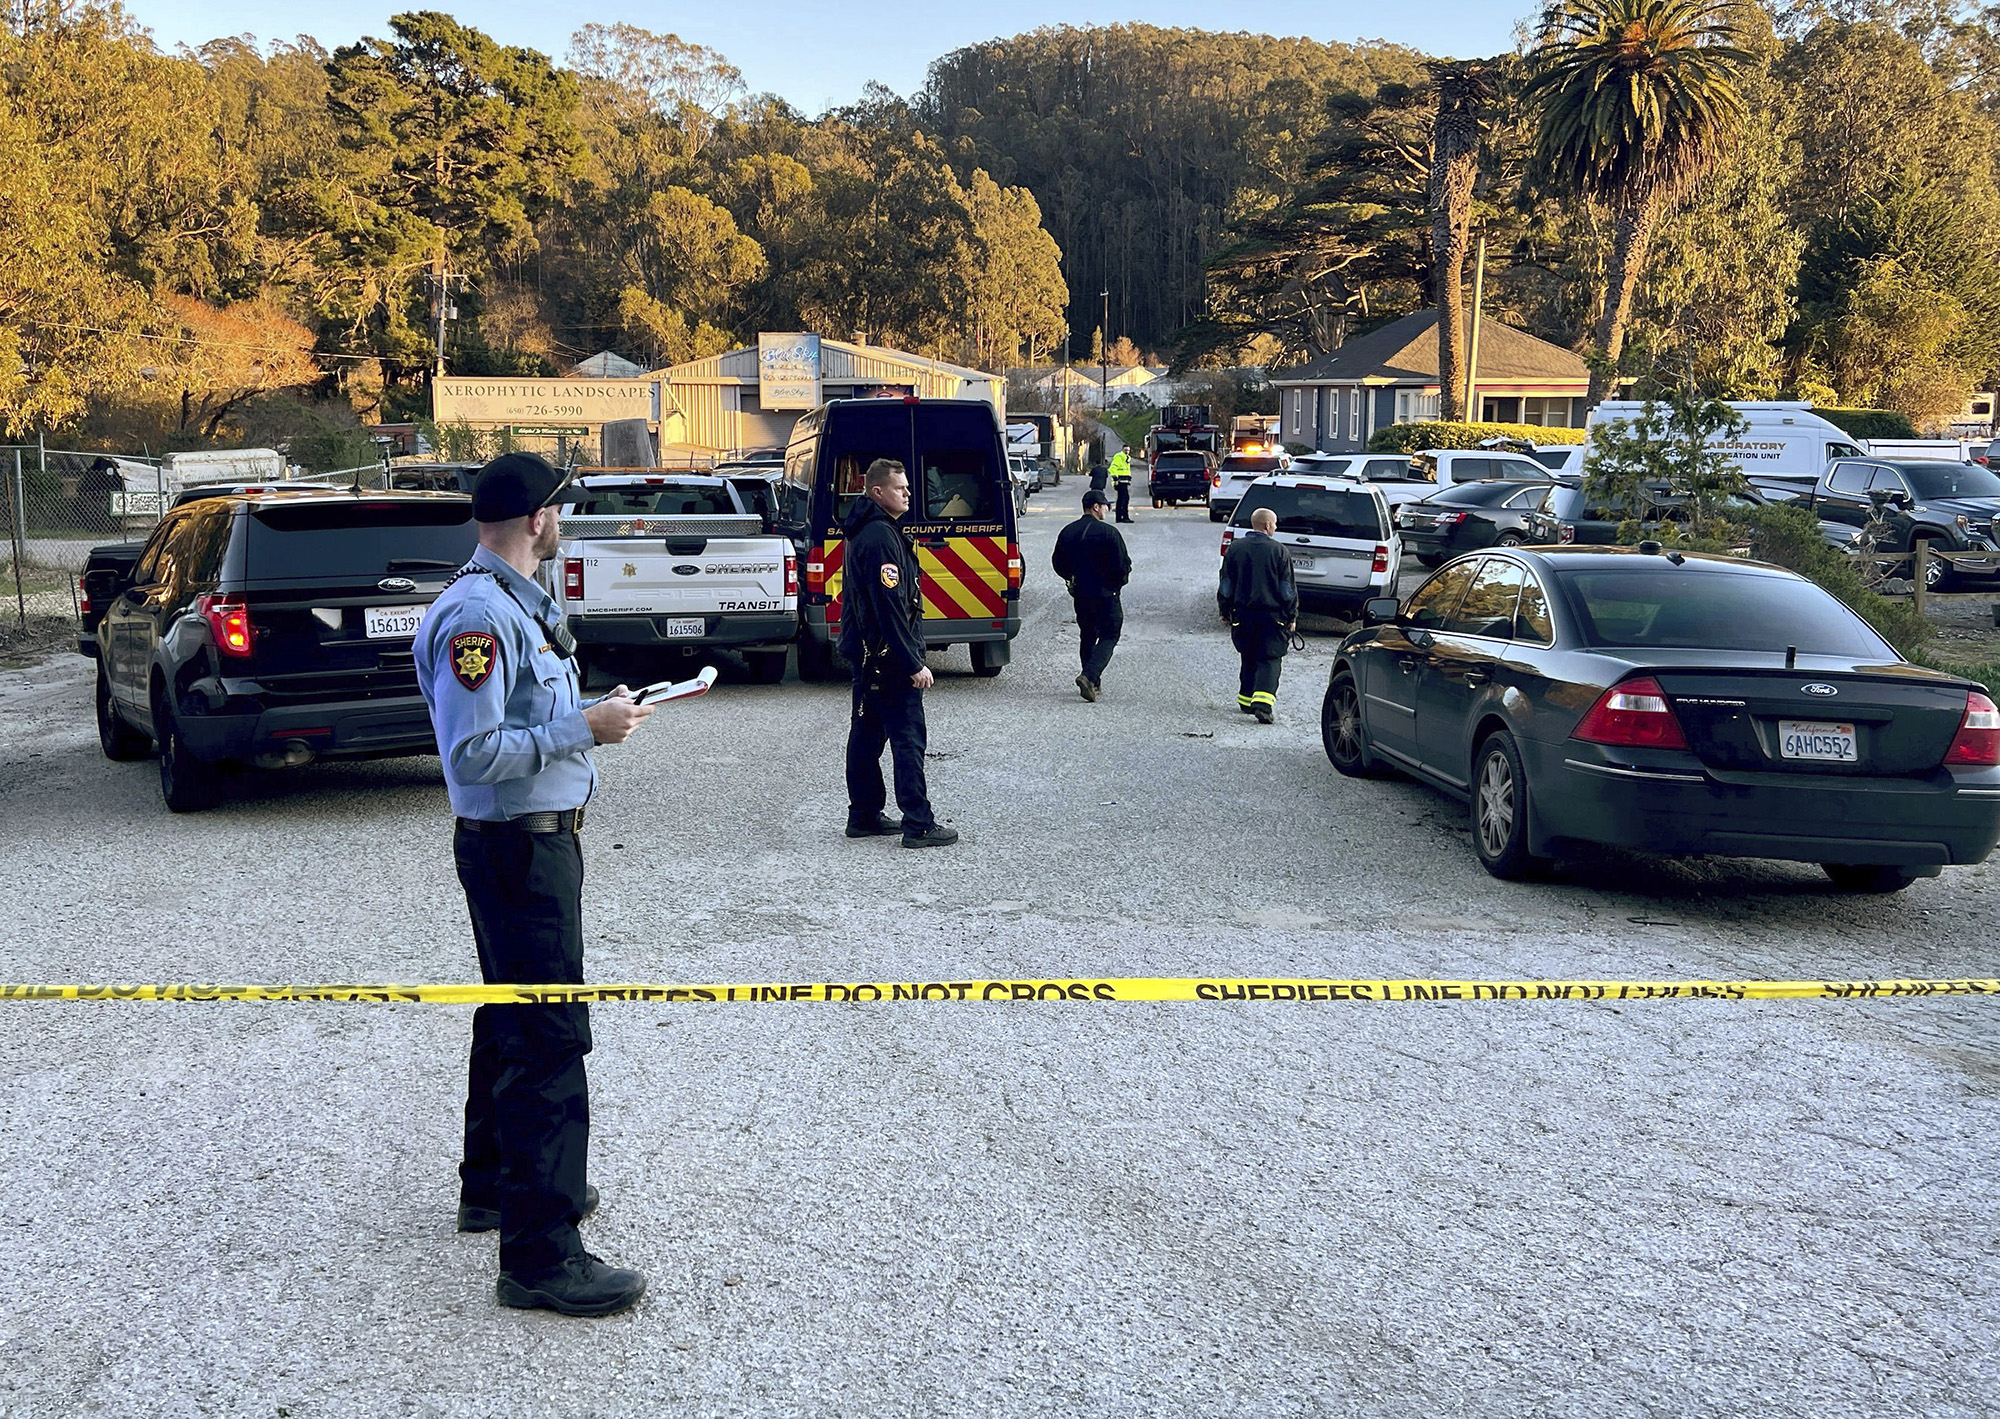 First responders work one of several crime scenes where multiple people were shot and killed on January 23, 2023, off state Highway 92 in Half Moon Bay, California.